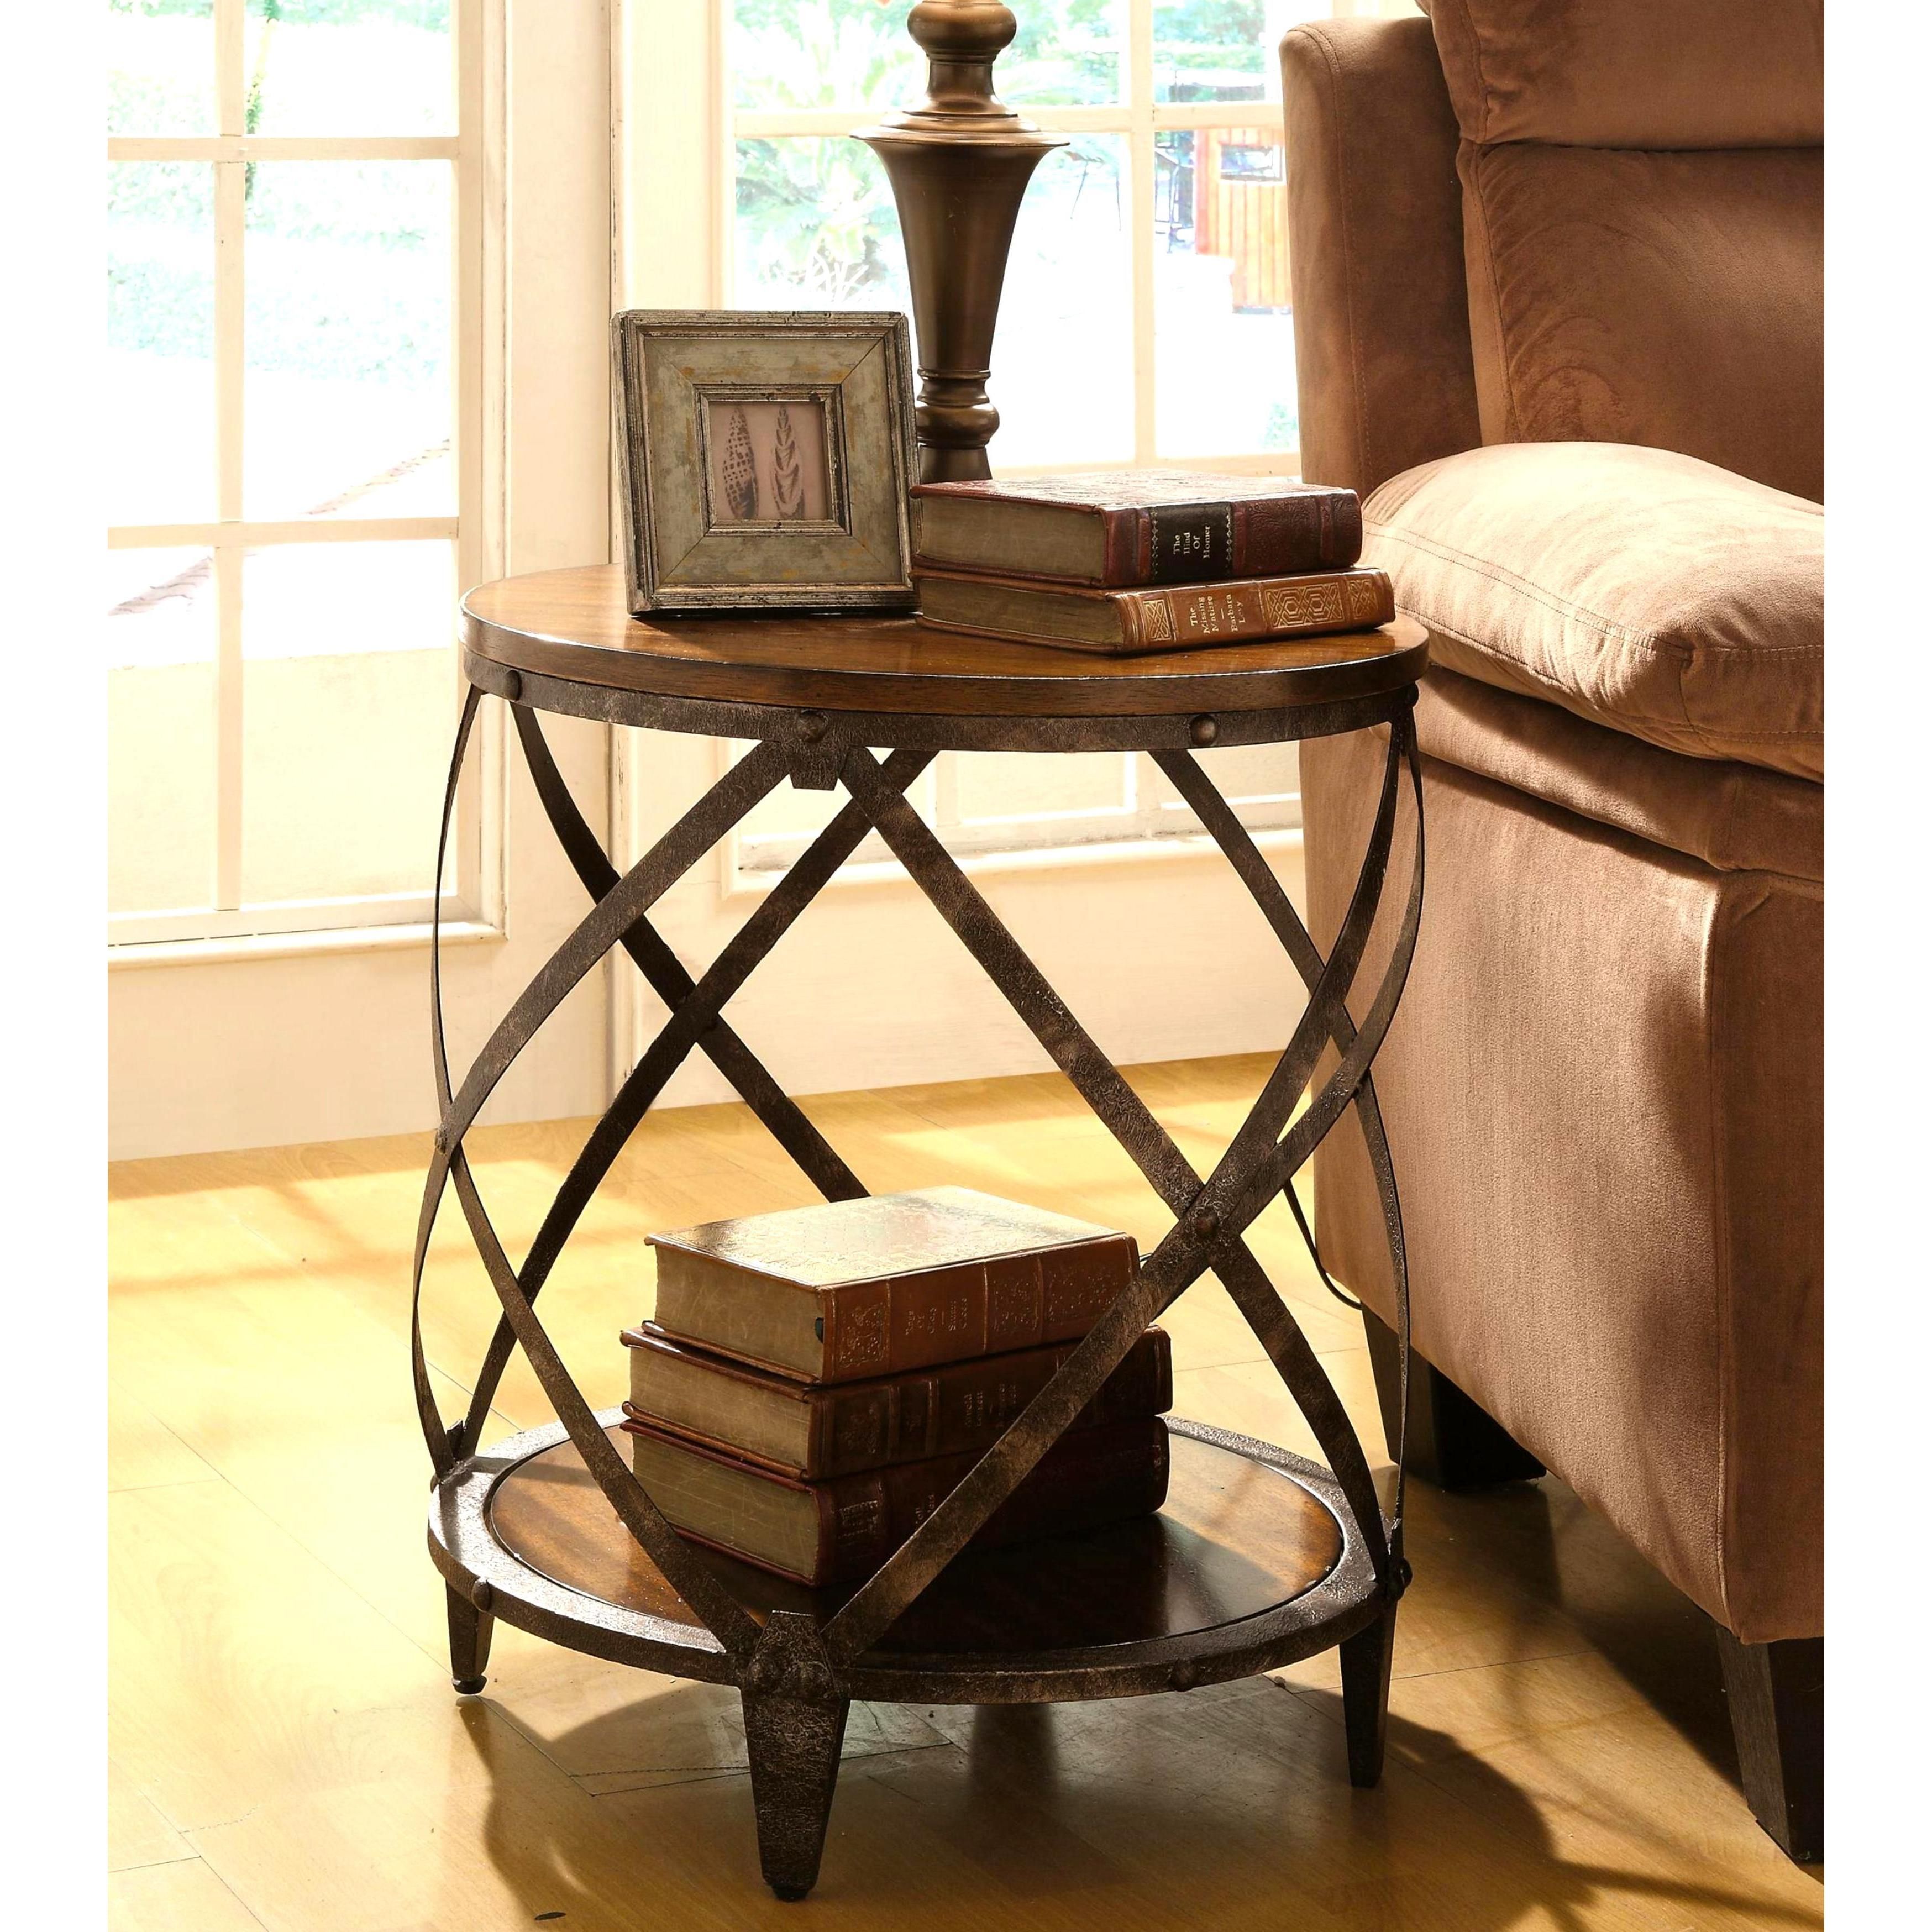 give your home contemporary and industrial appeal with this accent wood metal table constructed distressed frame drum shape features storage coffee nightstand lamps wall decor